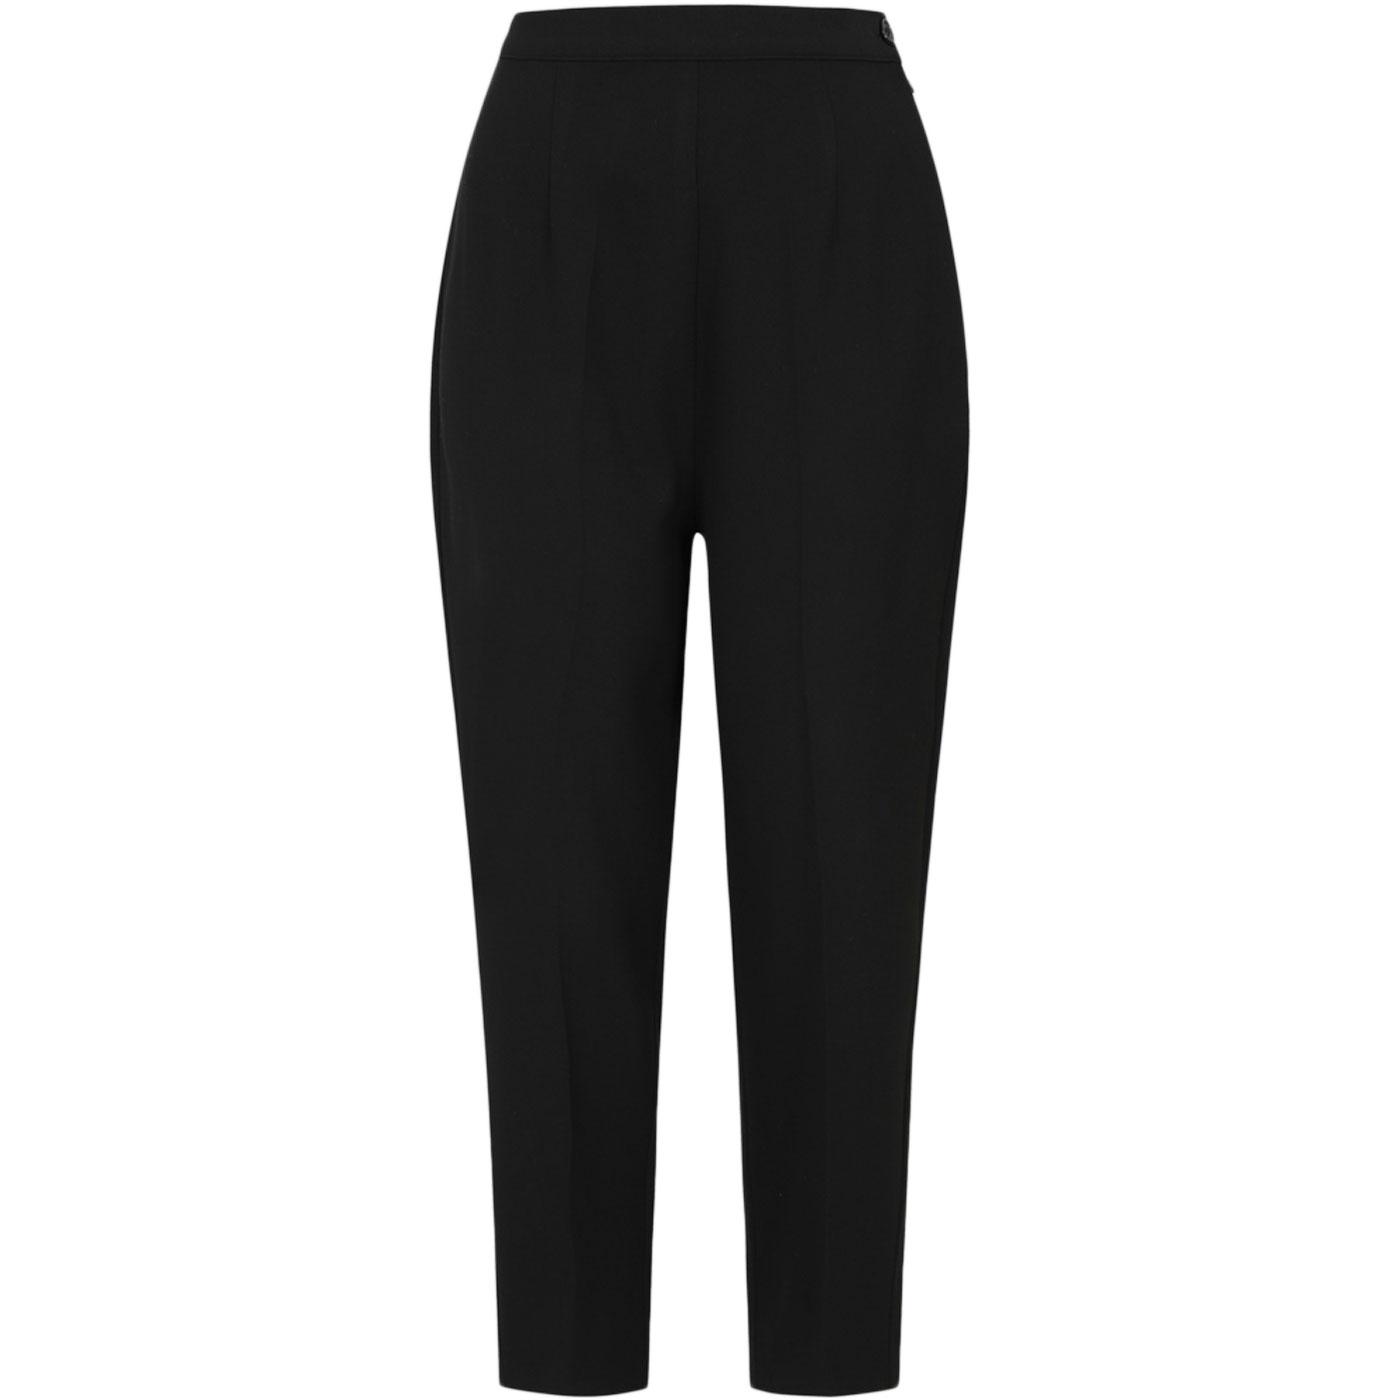 Nora Collectif Plain Pedal Pushers Retro Trousers 